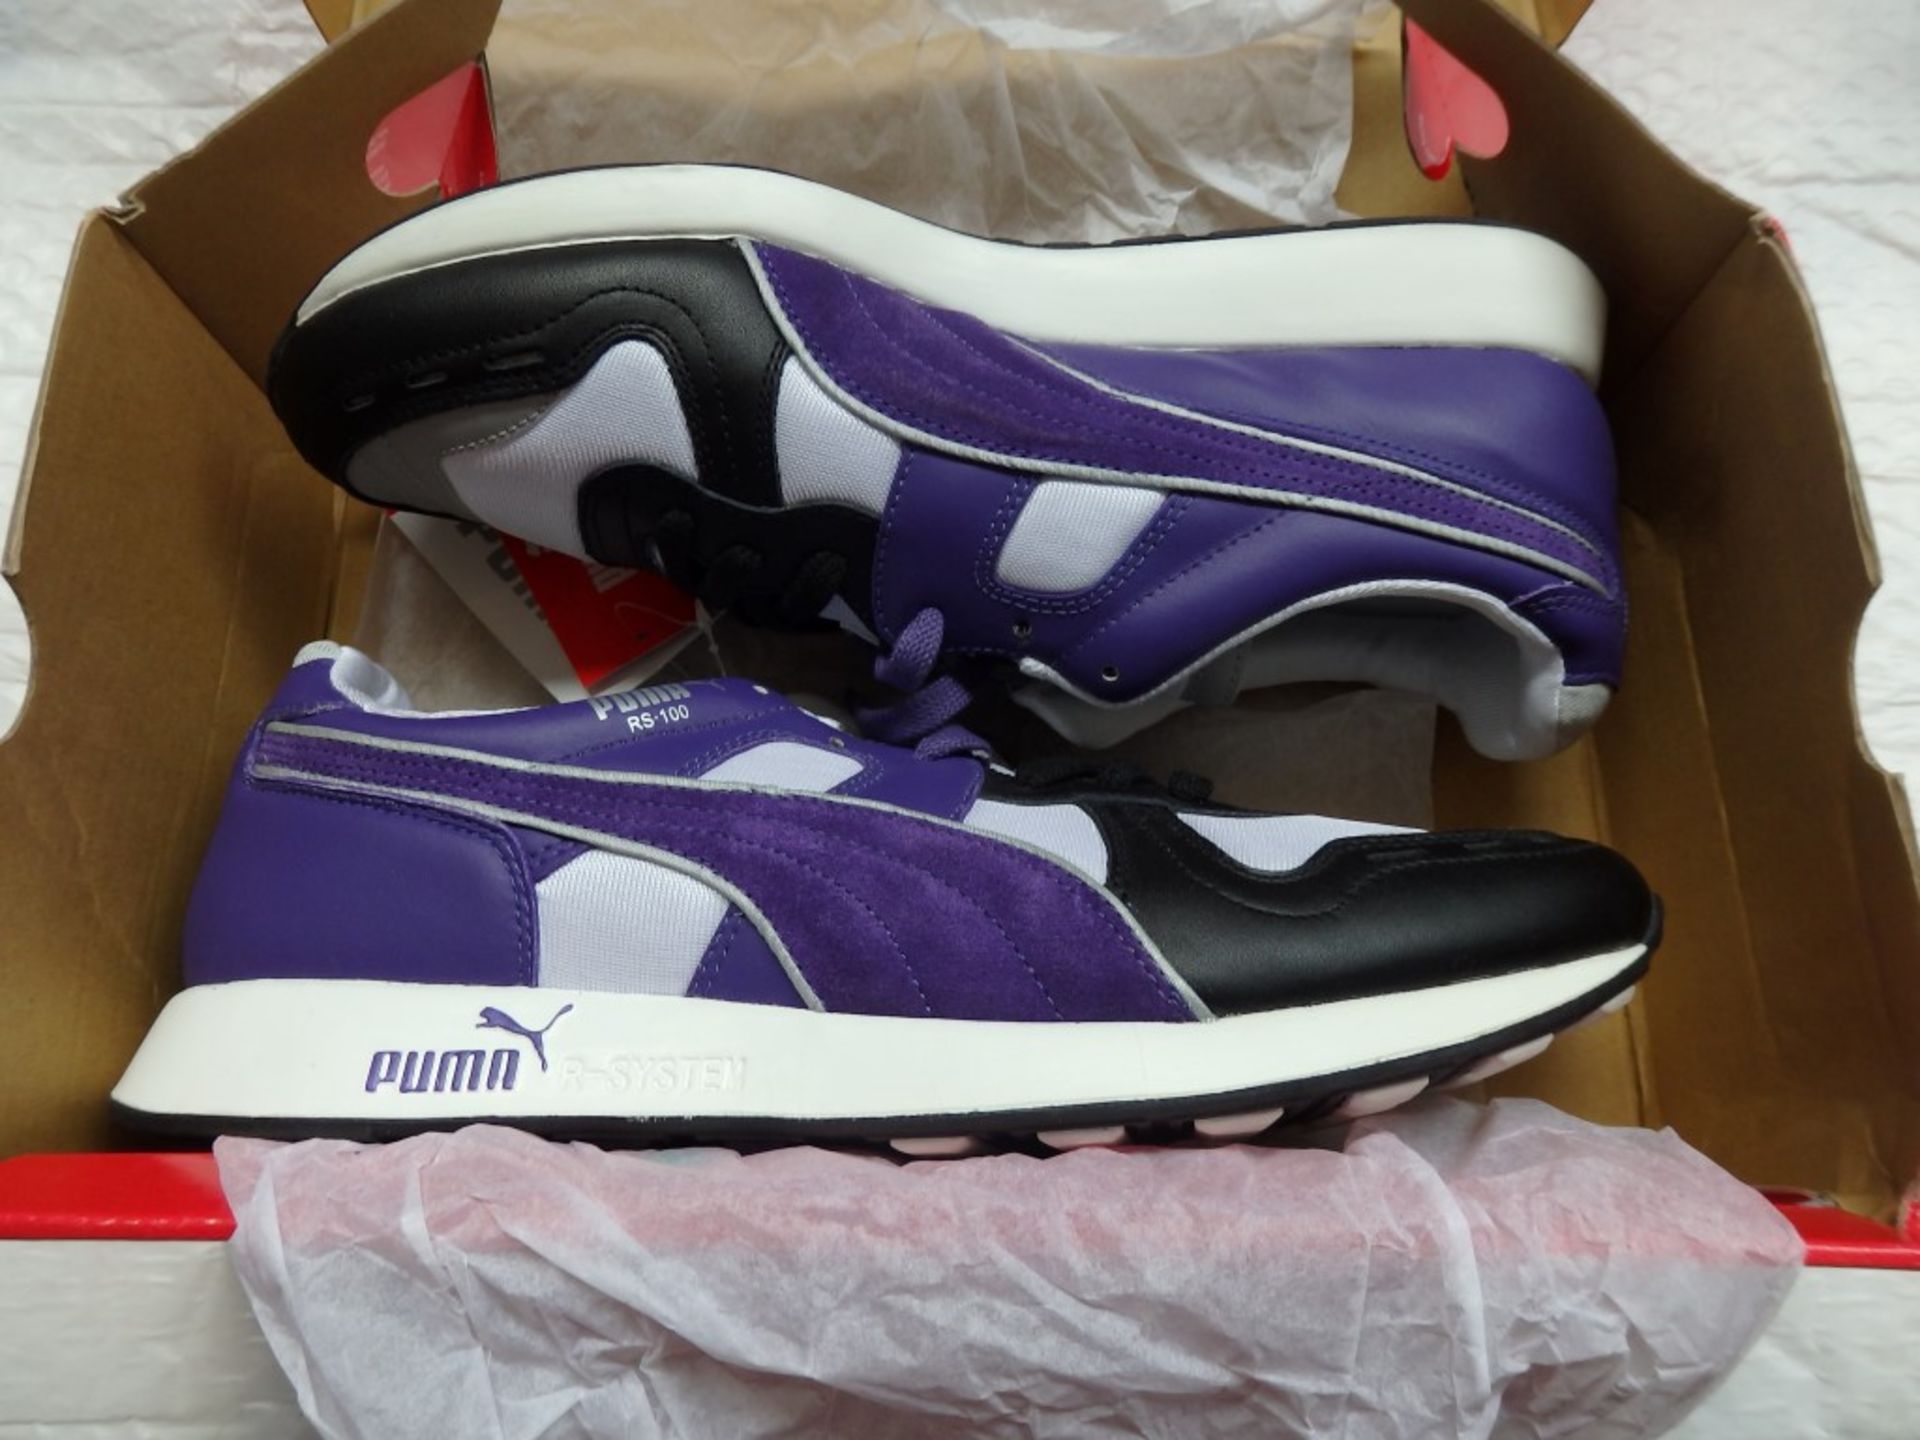 1 x Pair Of PUMA "RS100 LE" Trainers - Adult Size UK 10 - Gorgeous Suede Finish - New & Boxed - - Image 2 of 11